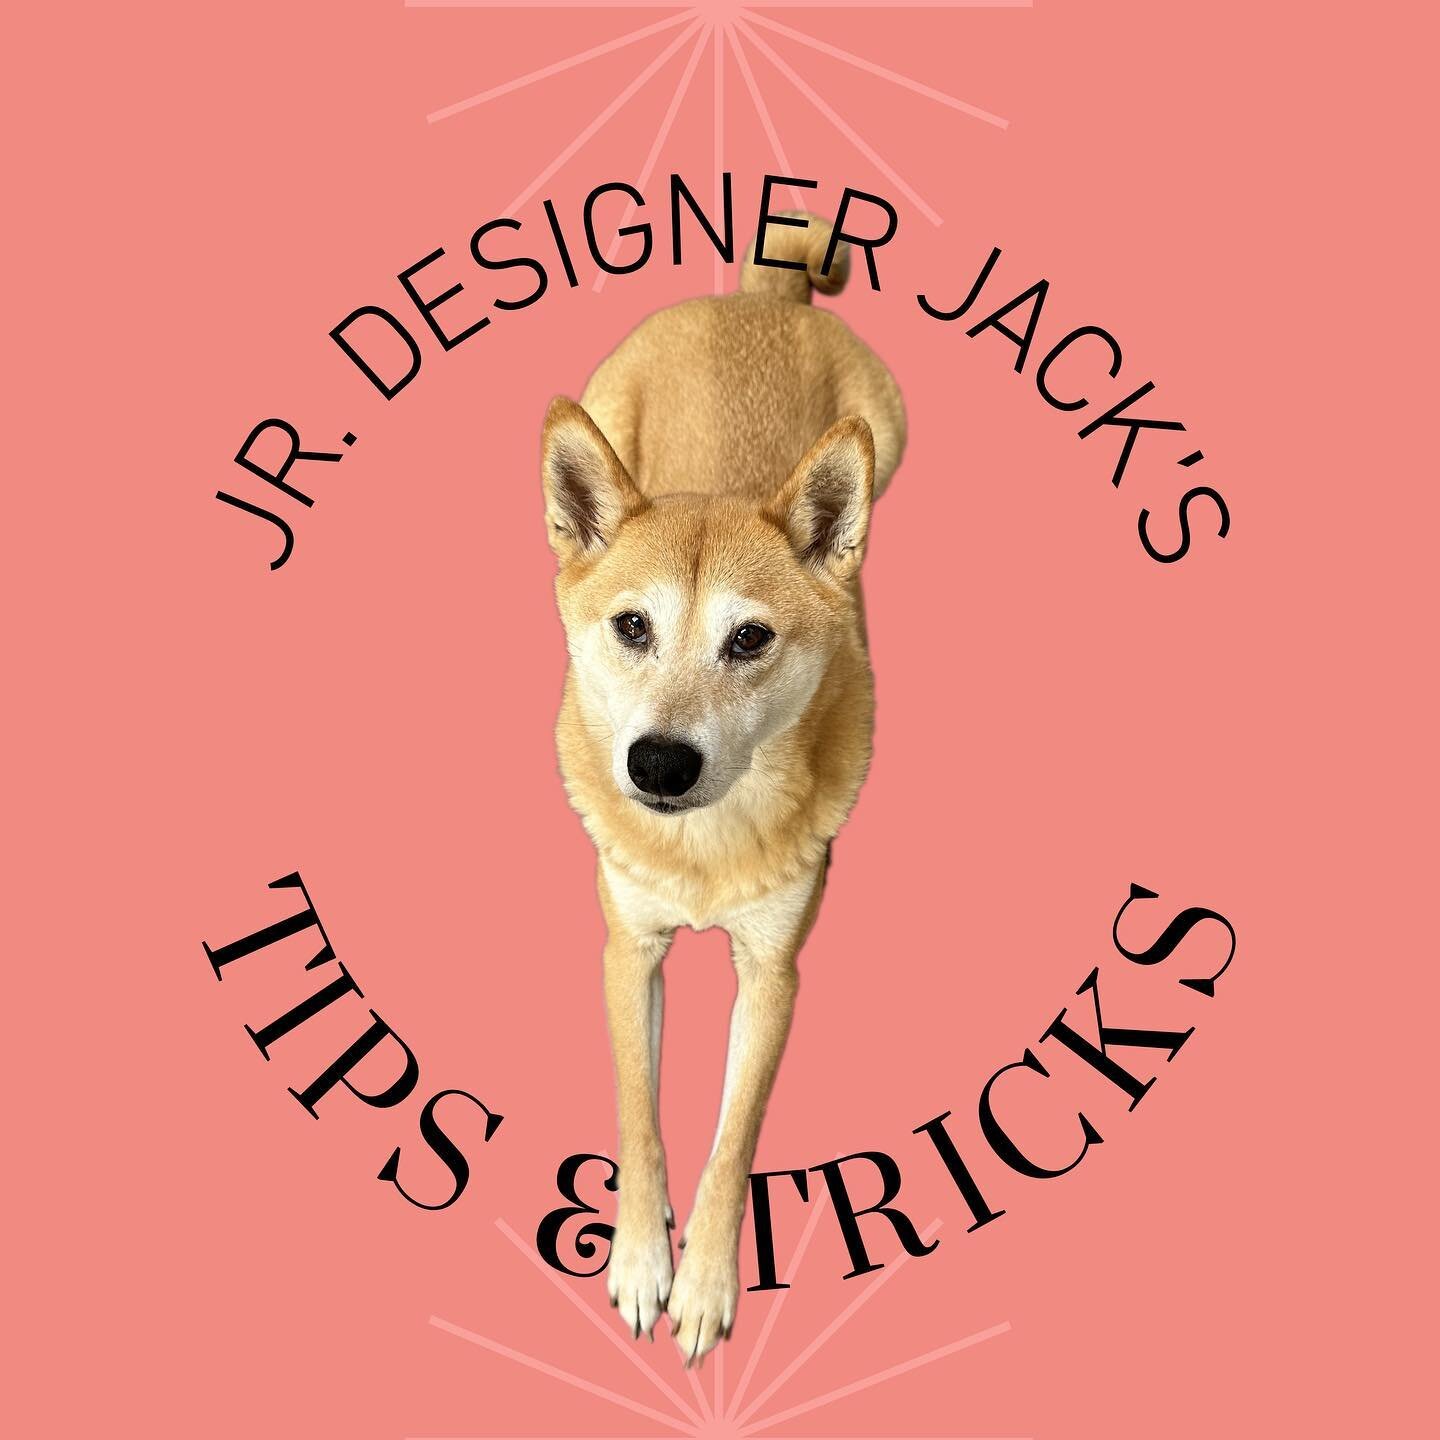 Our Jr. Designer Jack believes less is always more. Except when it comes to treats - you can never have too many treats. But in design, embracing white space can be the golden ticket to a successful message.